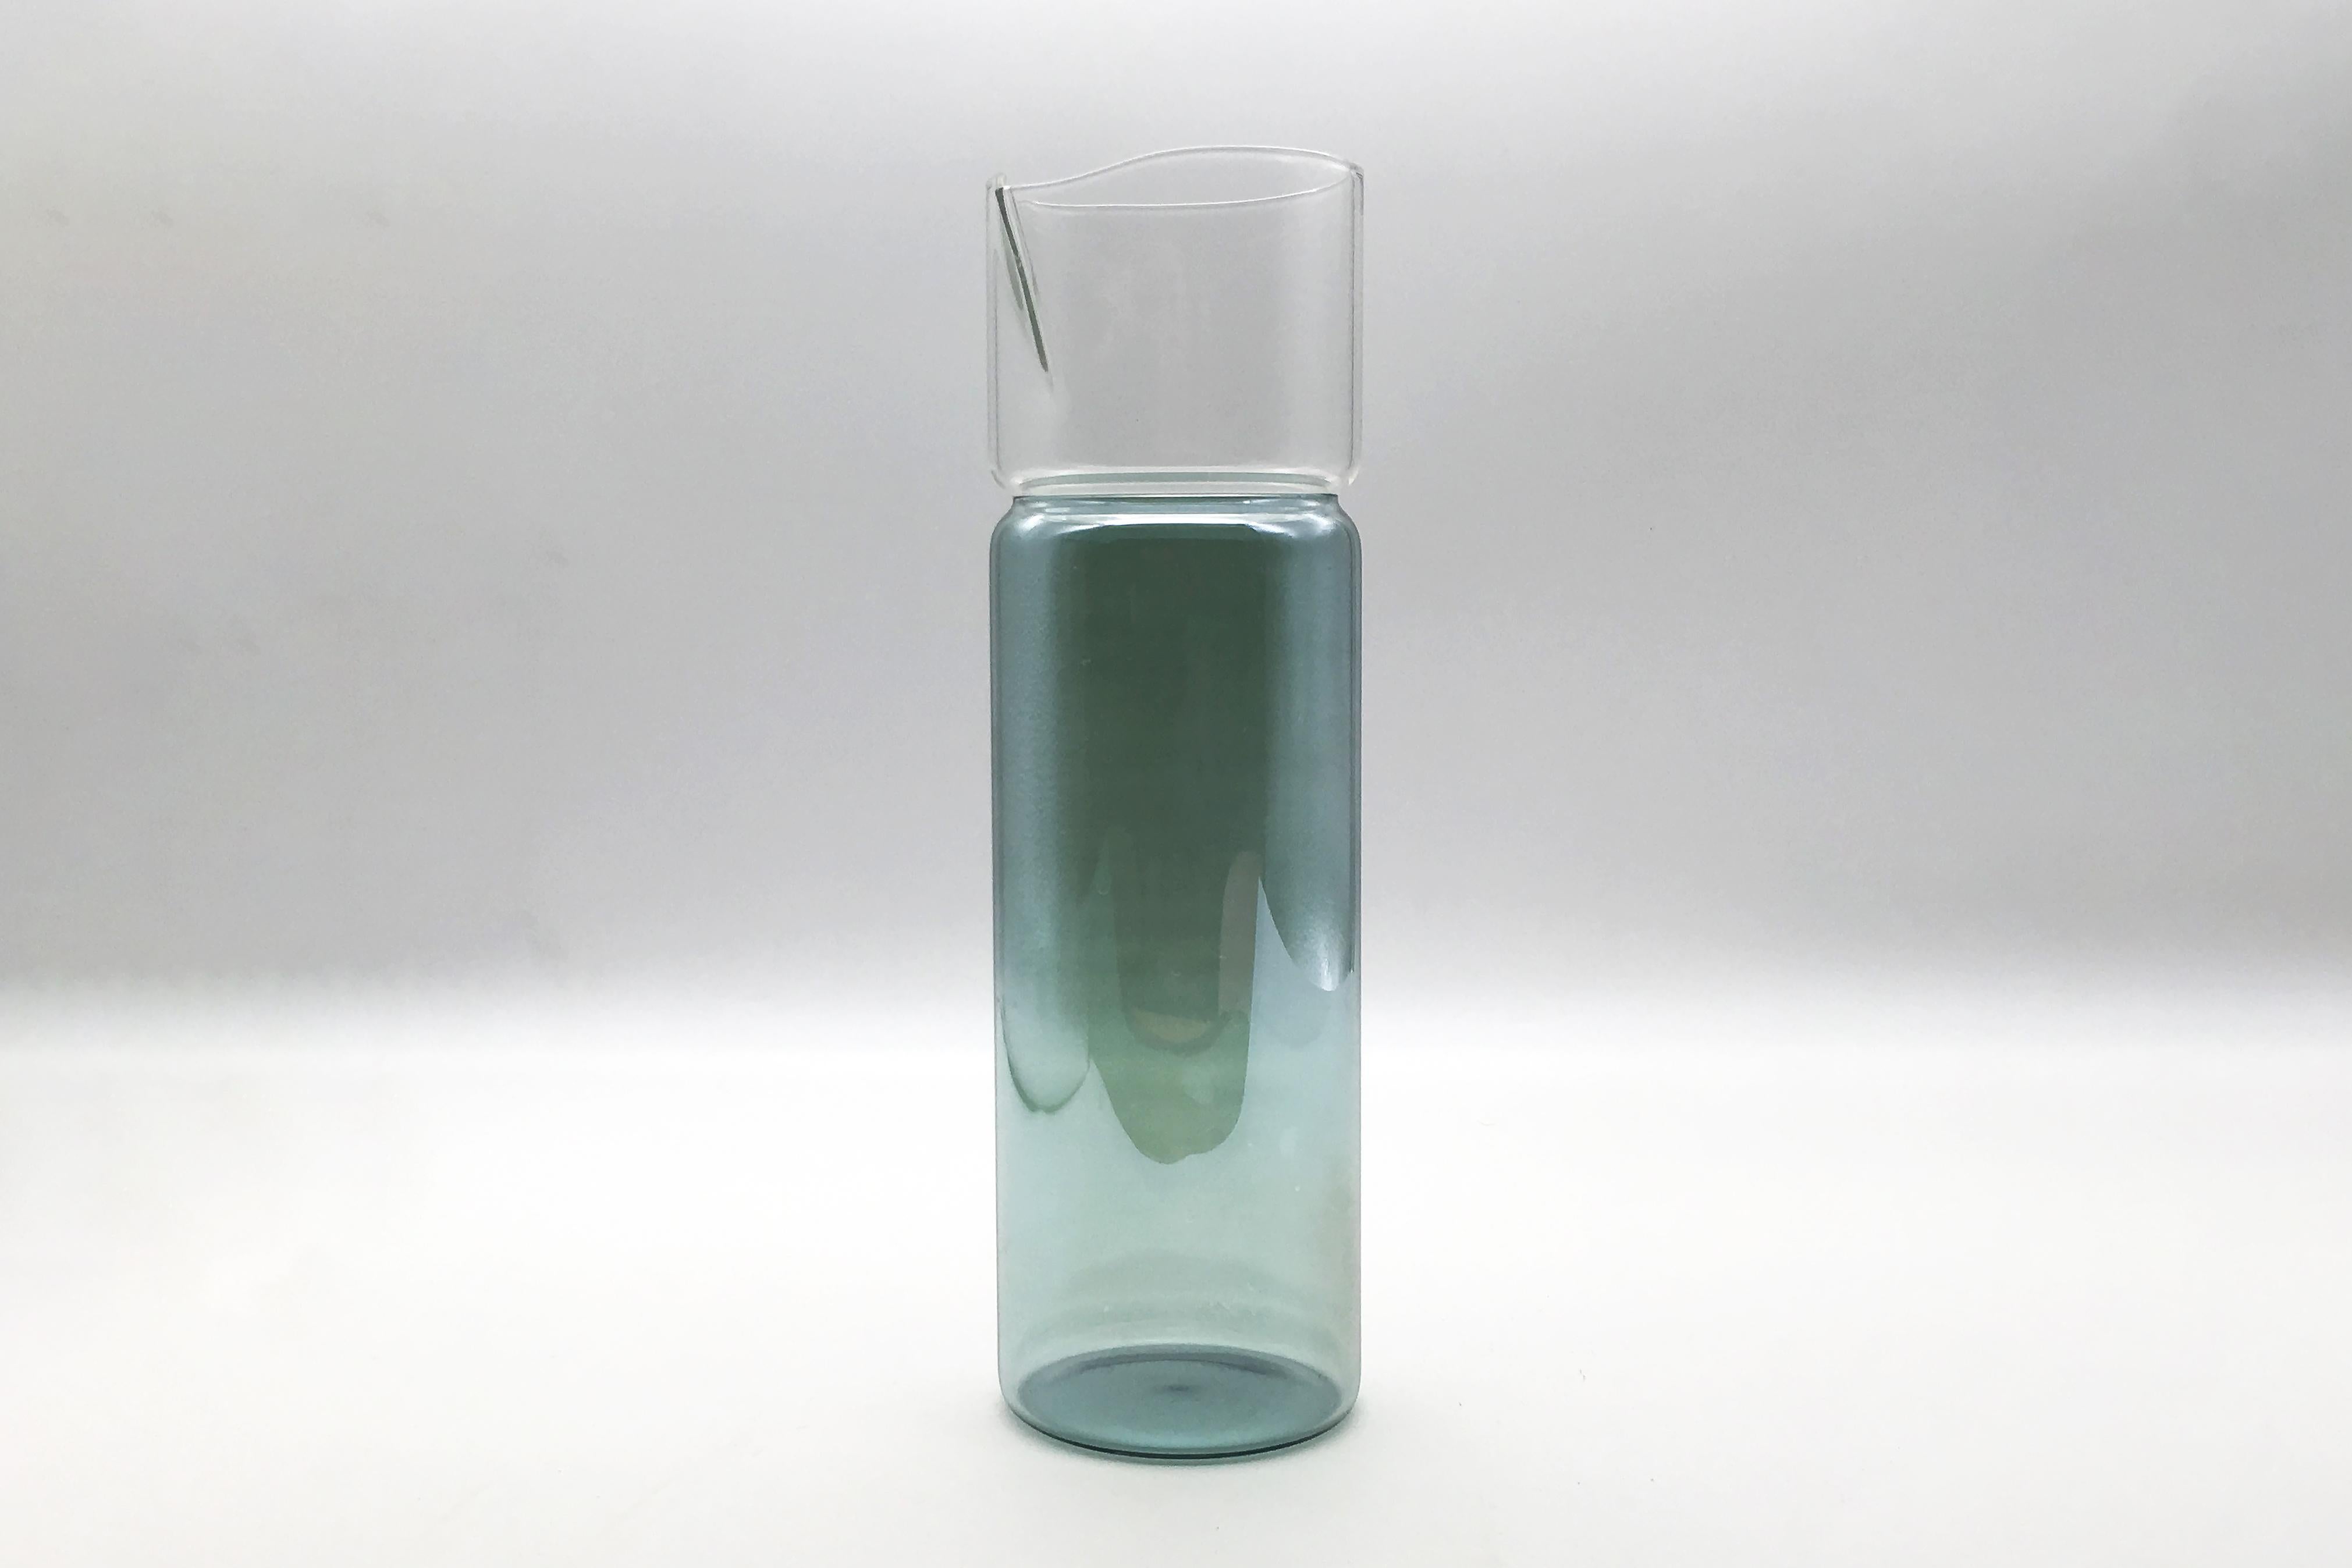 Carafe in borosilicate glass handmade by Venetian artisans, characterized by the green color which creates a kaleidoscopic play of colored reflections. The color is applied by hand with a brush.
It can contain up to 75 cl of liquid.